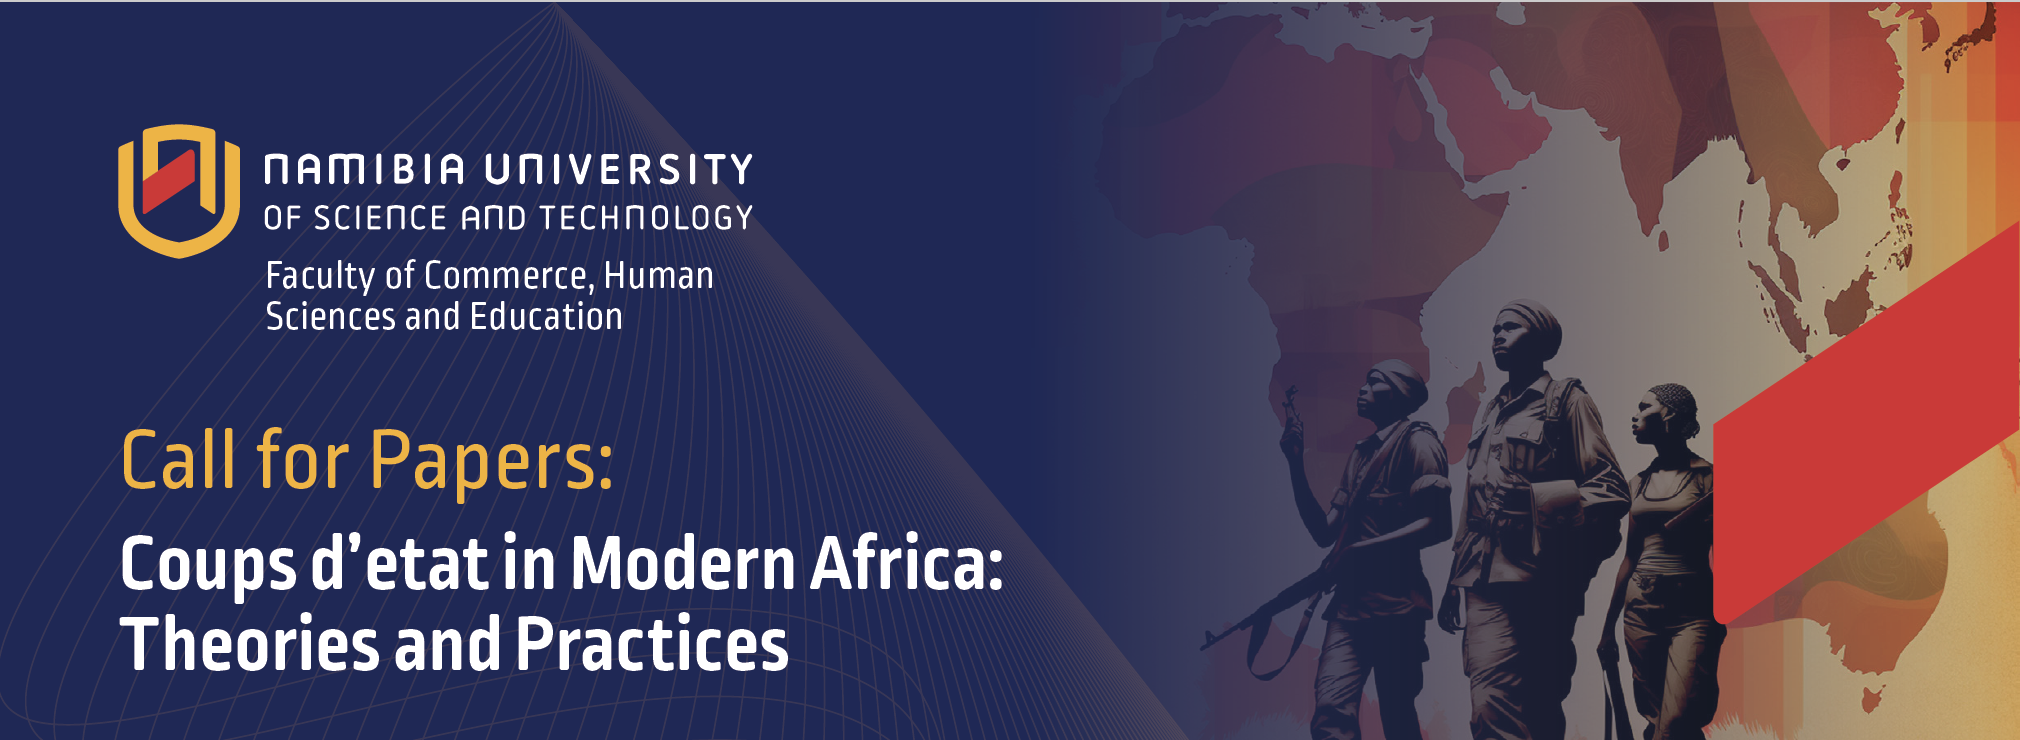 Coups d’etat in Modern Africa: Theories and Practices